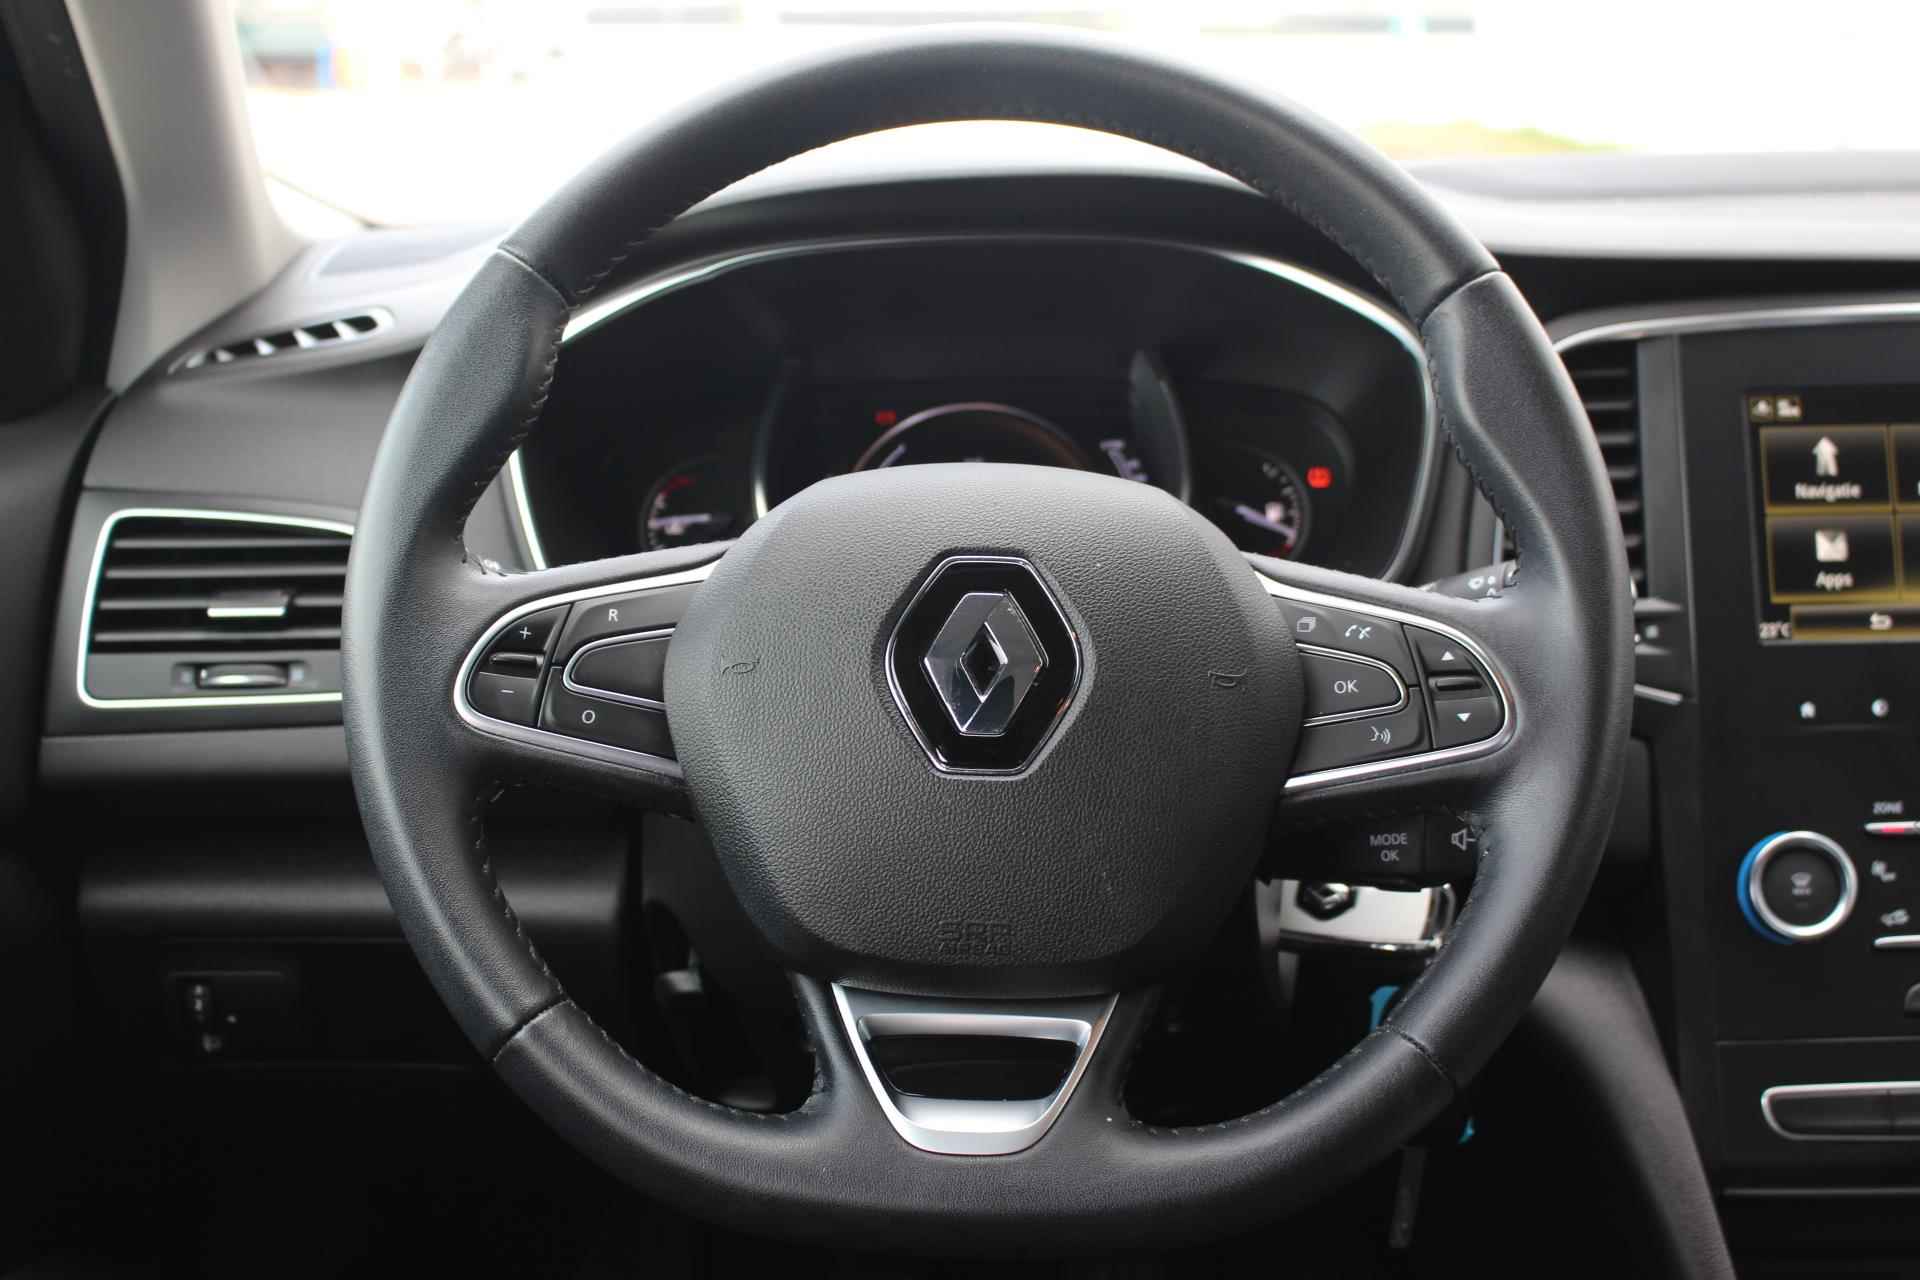 Renault Mégane 1.3 TCe Zen Dab+ audio Climate + cruise control Navi PDC achter Led verlichting voor + achter - 19/34